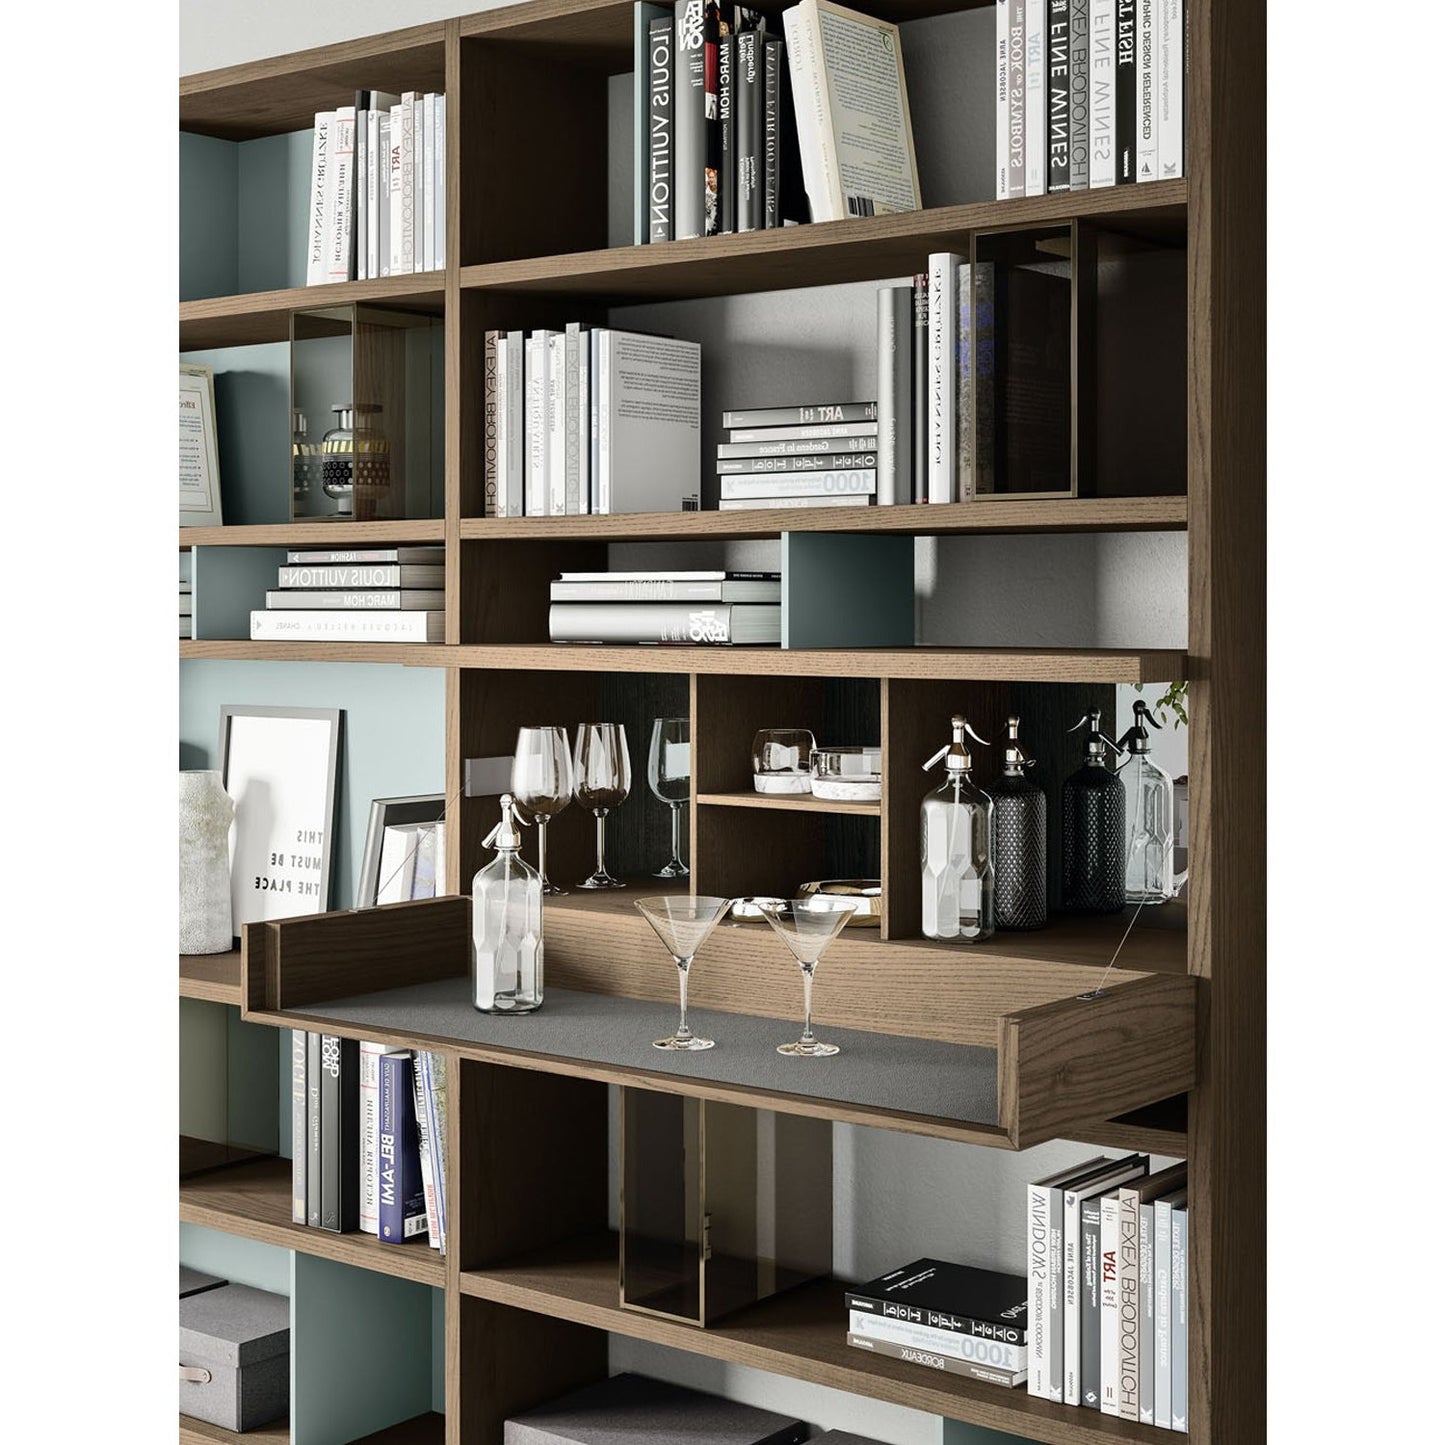 Day 29 Logico Wall Unit by Orme Design